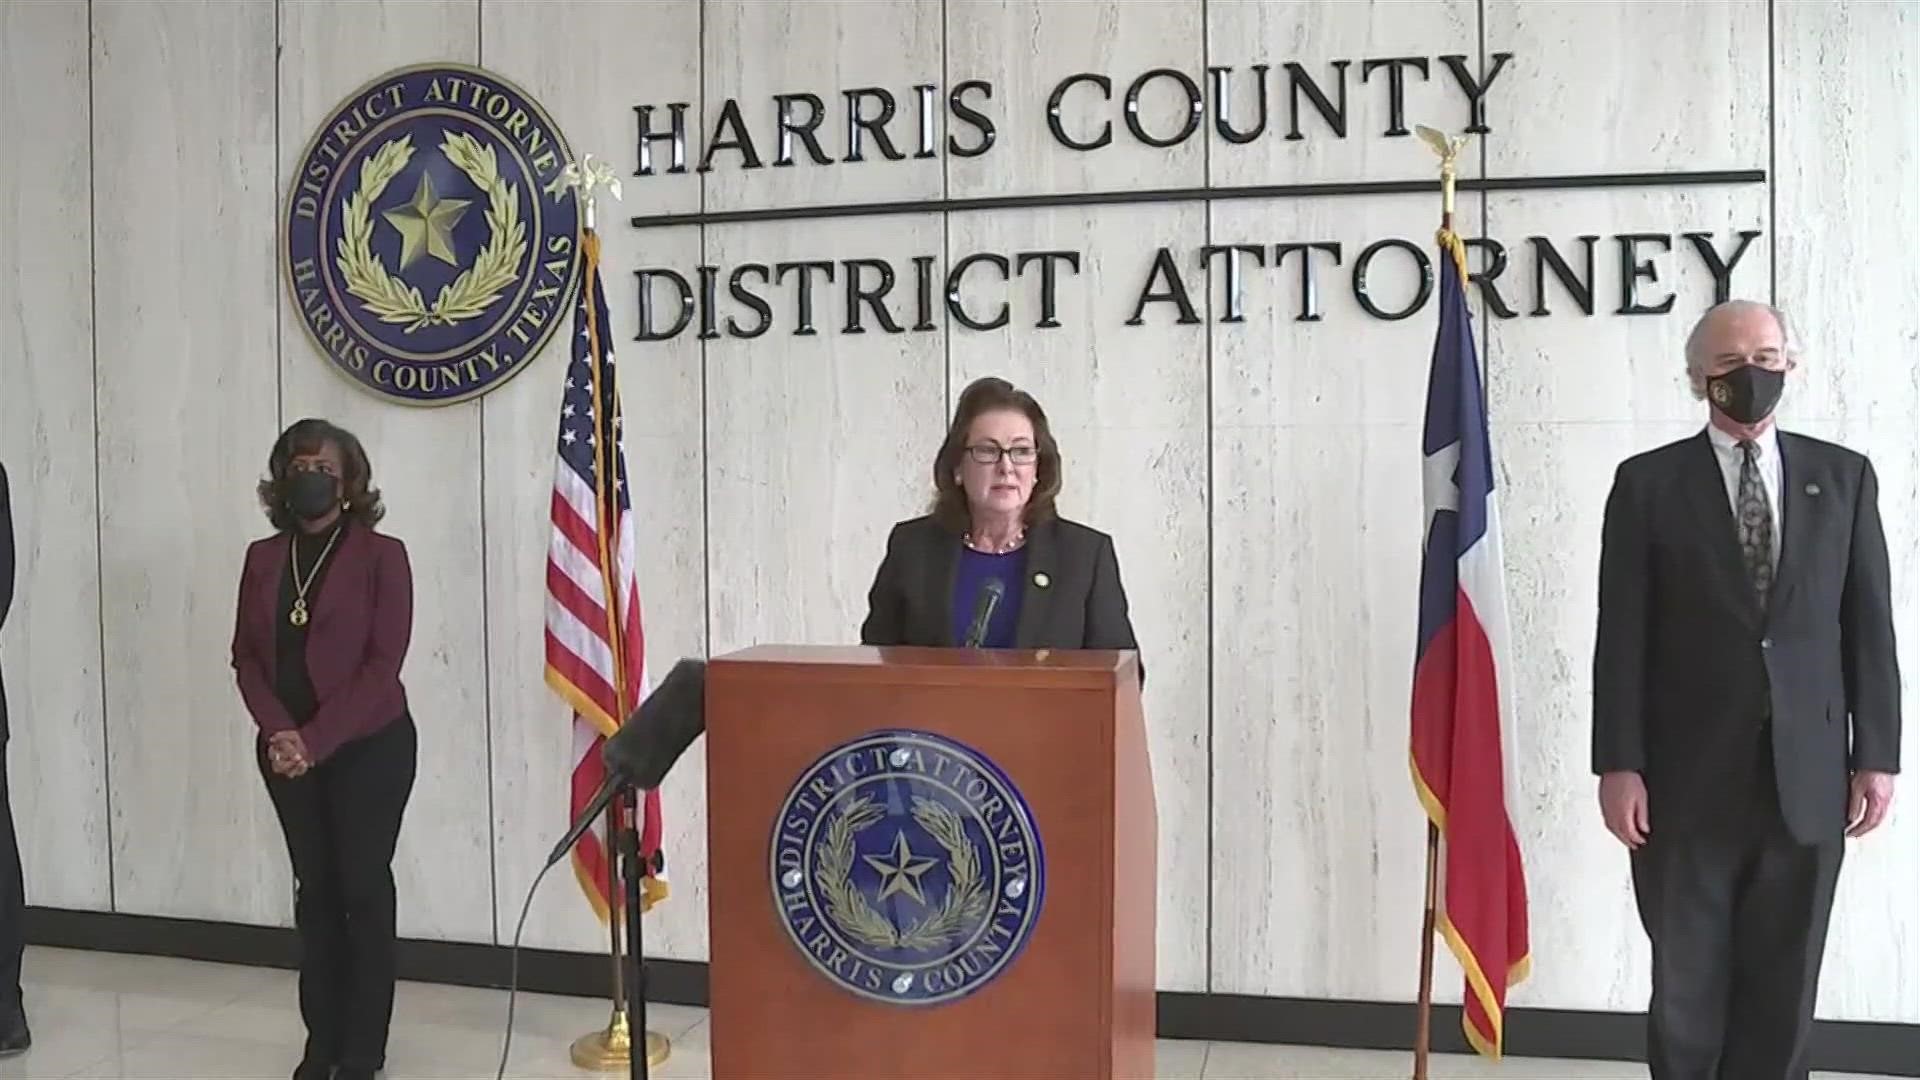 Ogg announced that several more Houston police officers have been charged in connection with the deadly raid in southeast Houston in January 2019.